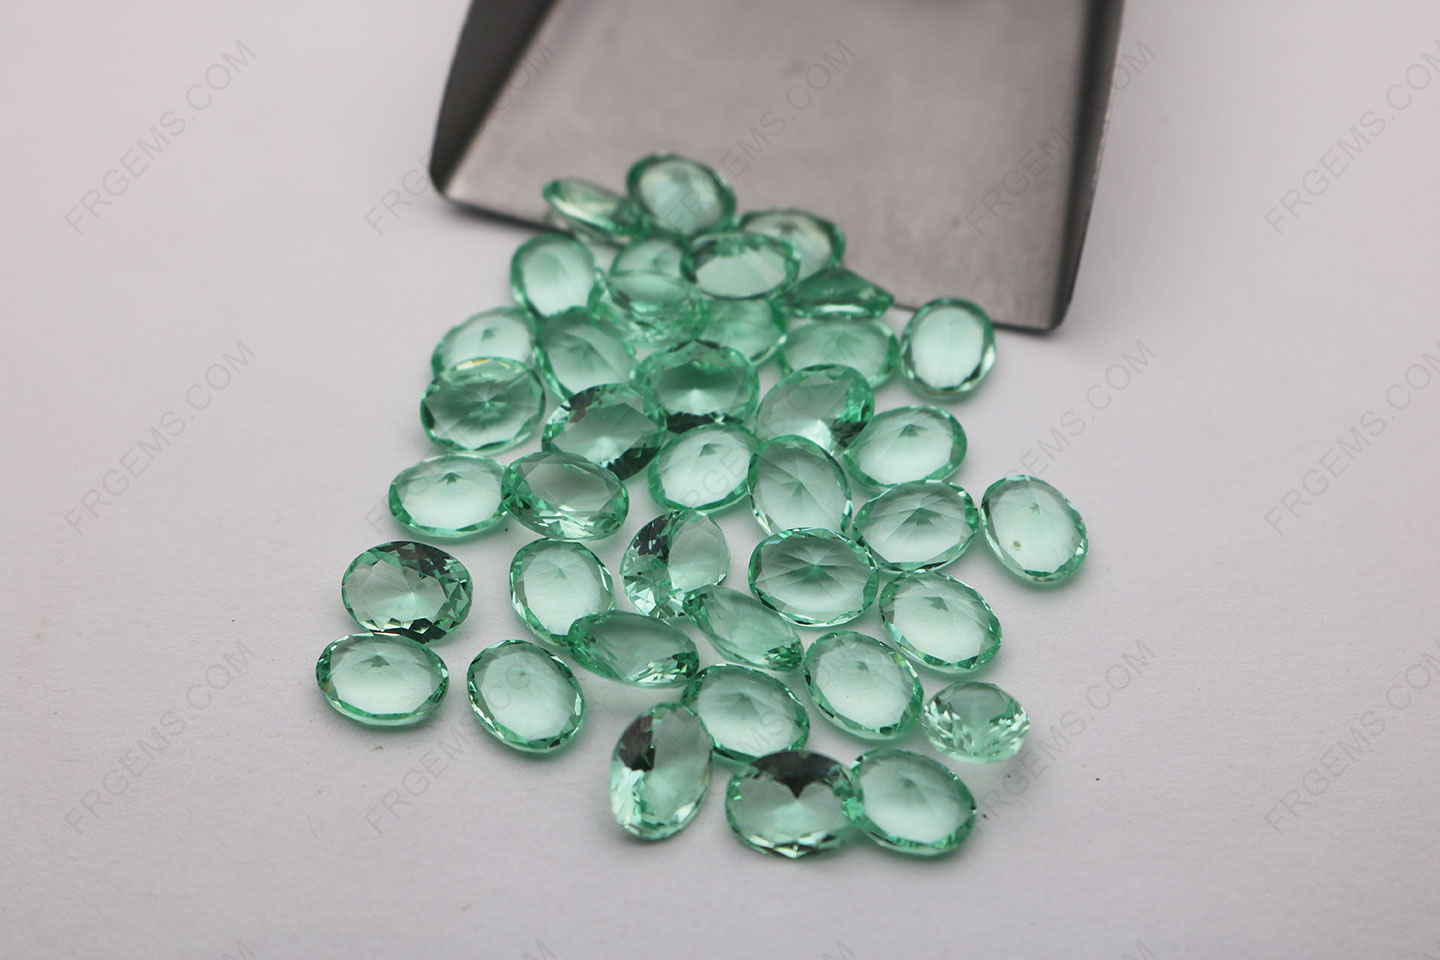 Loose Glass Mint Green Tourmaline BE08# color Oval faceted 9x7mm gemstones China Suppliers